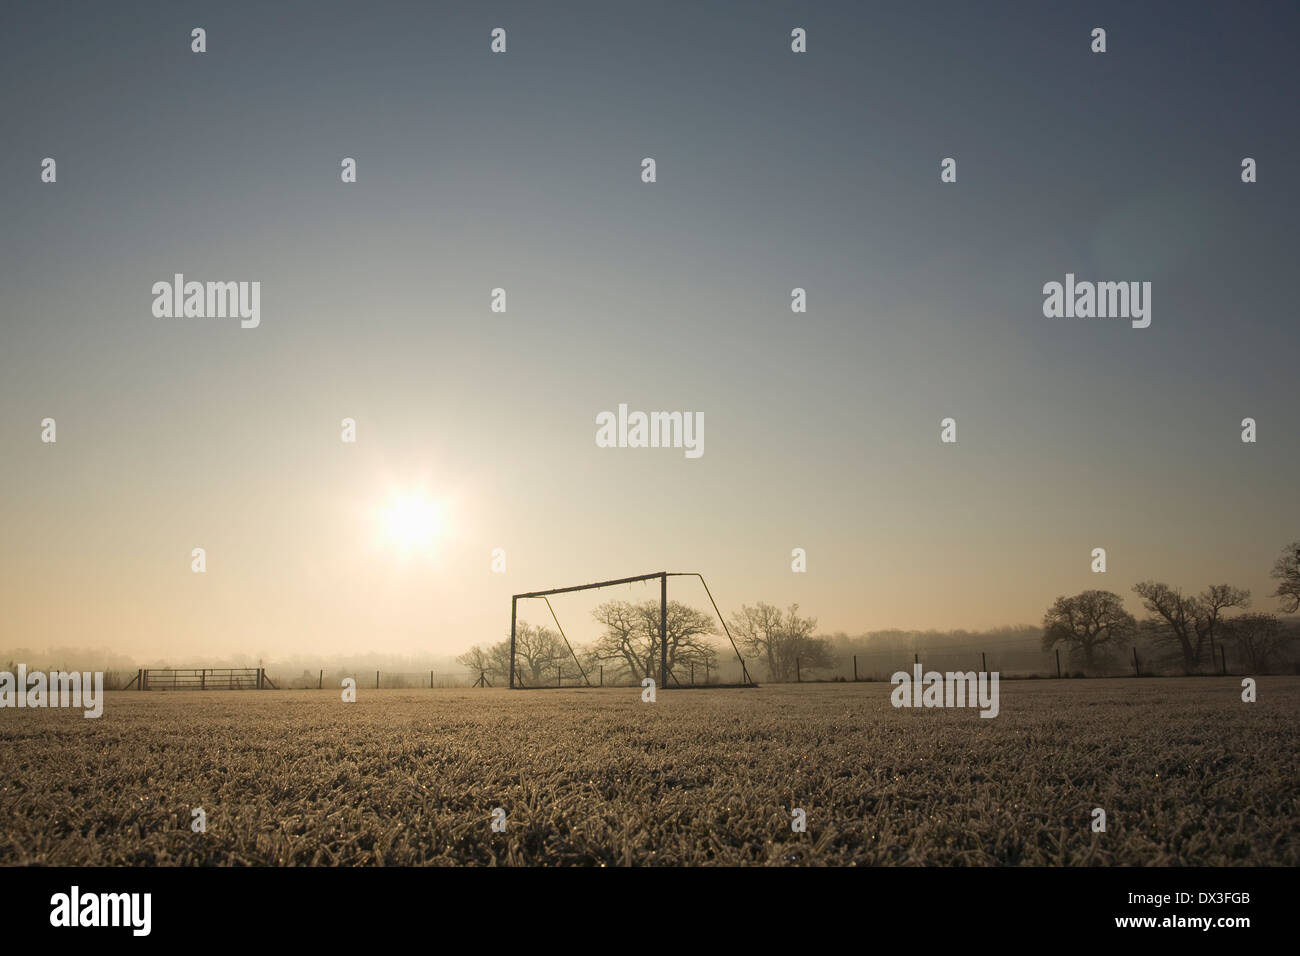 empty football pitch and goal on a frosty winter morning sunrise Stock Photo